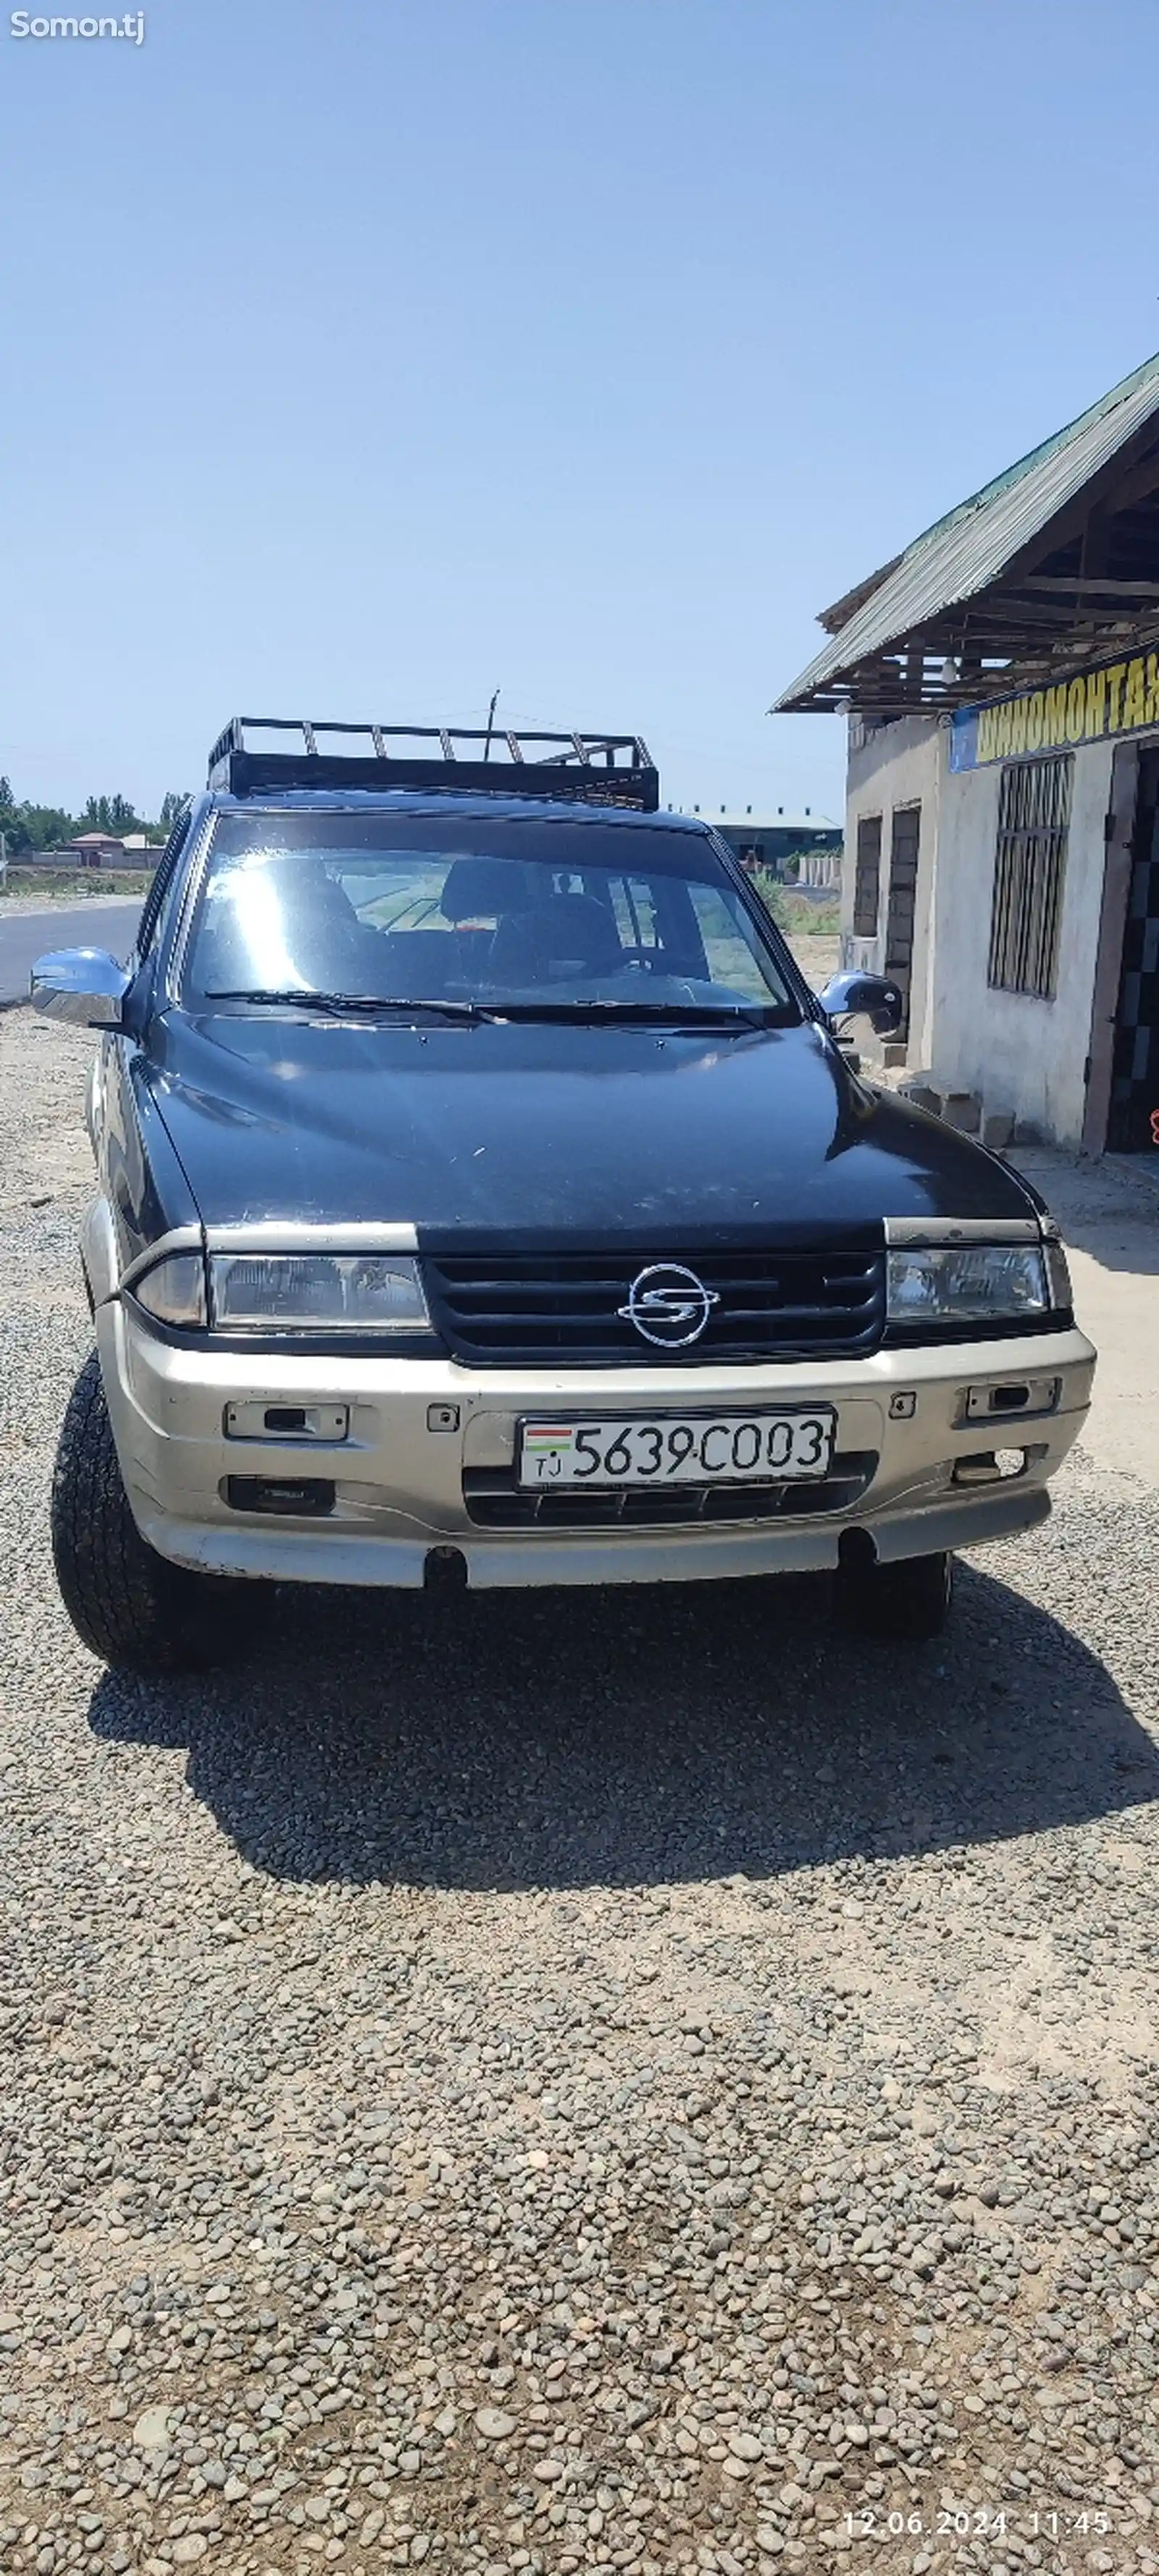 Ssang Yong Musso, 1993-10